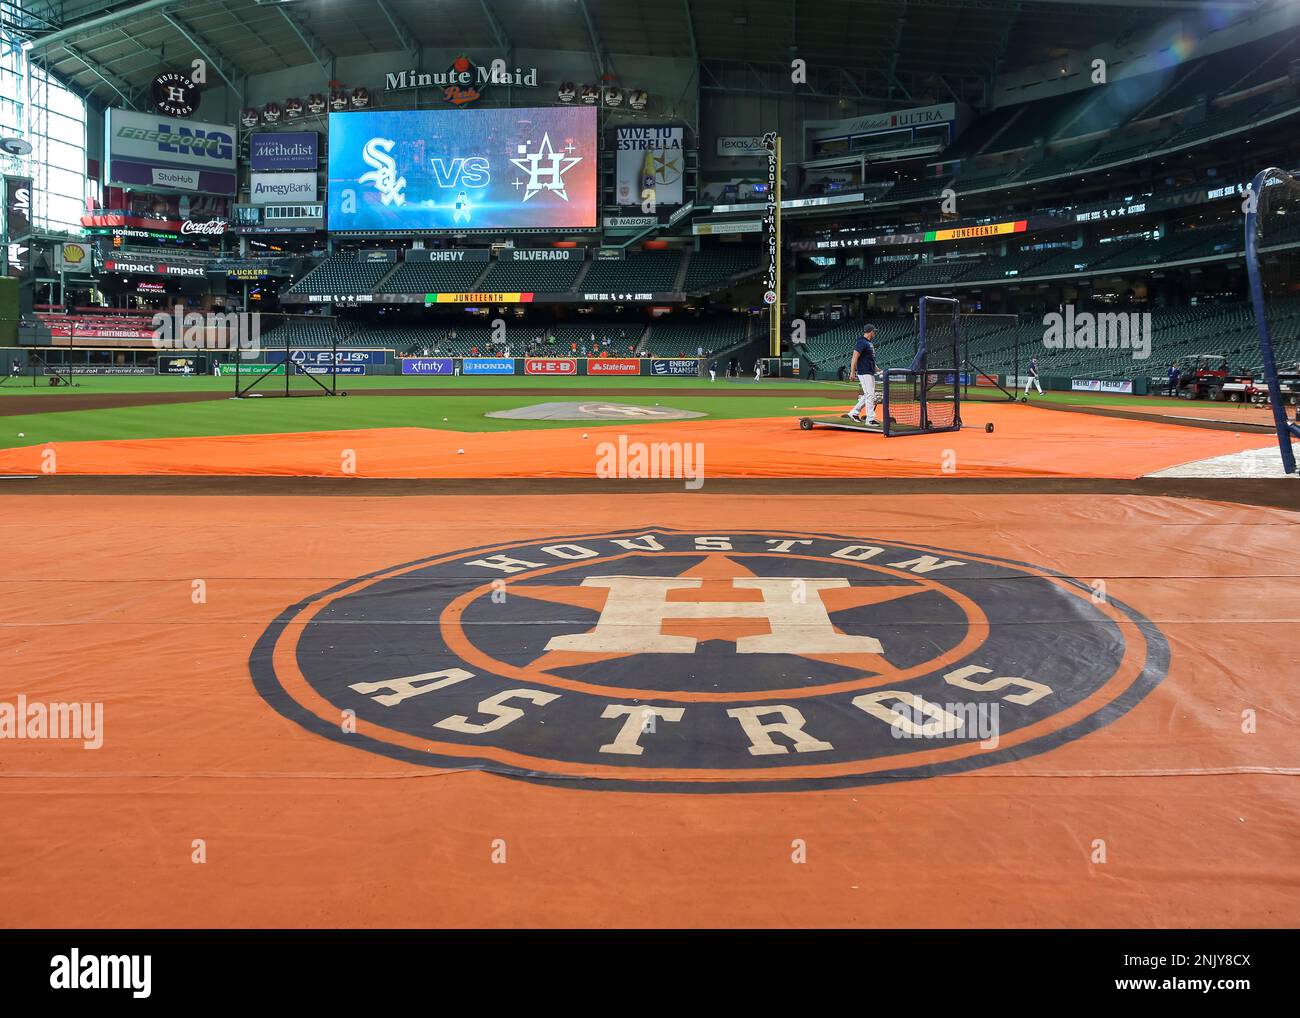 HOUSTON, TX - JUNE 19: Jumbotron displays team logos during the baseball  game between the Chicago White Sox and Houston Astros on June 19, 2022 at Minute  Maid Park in Houston, Texas. (